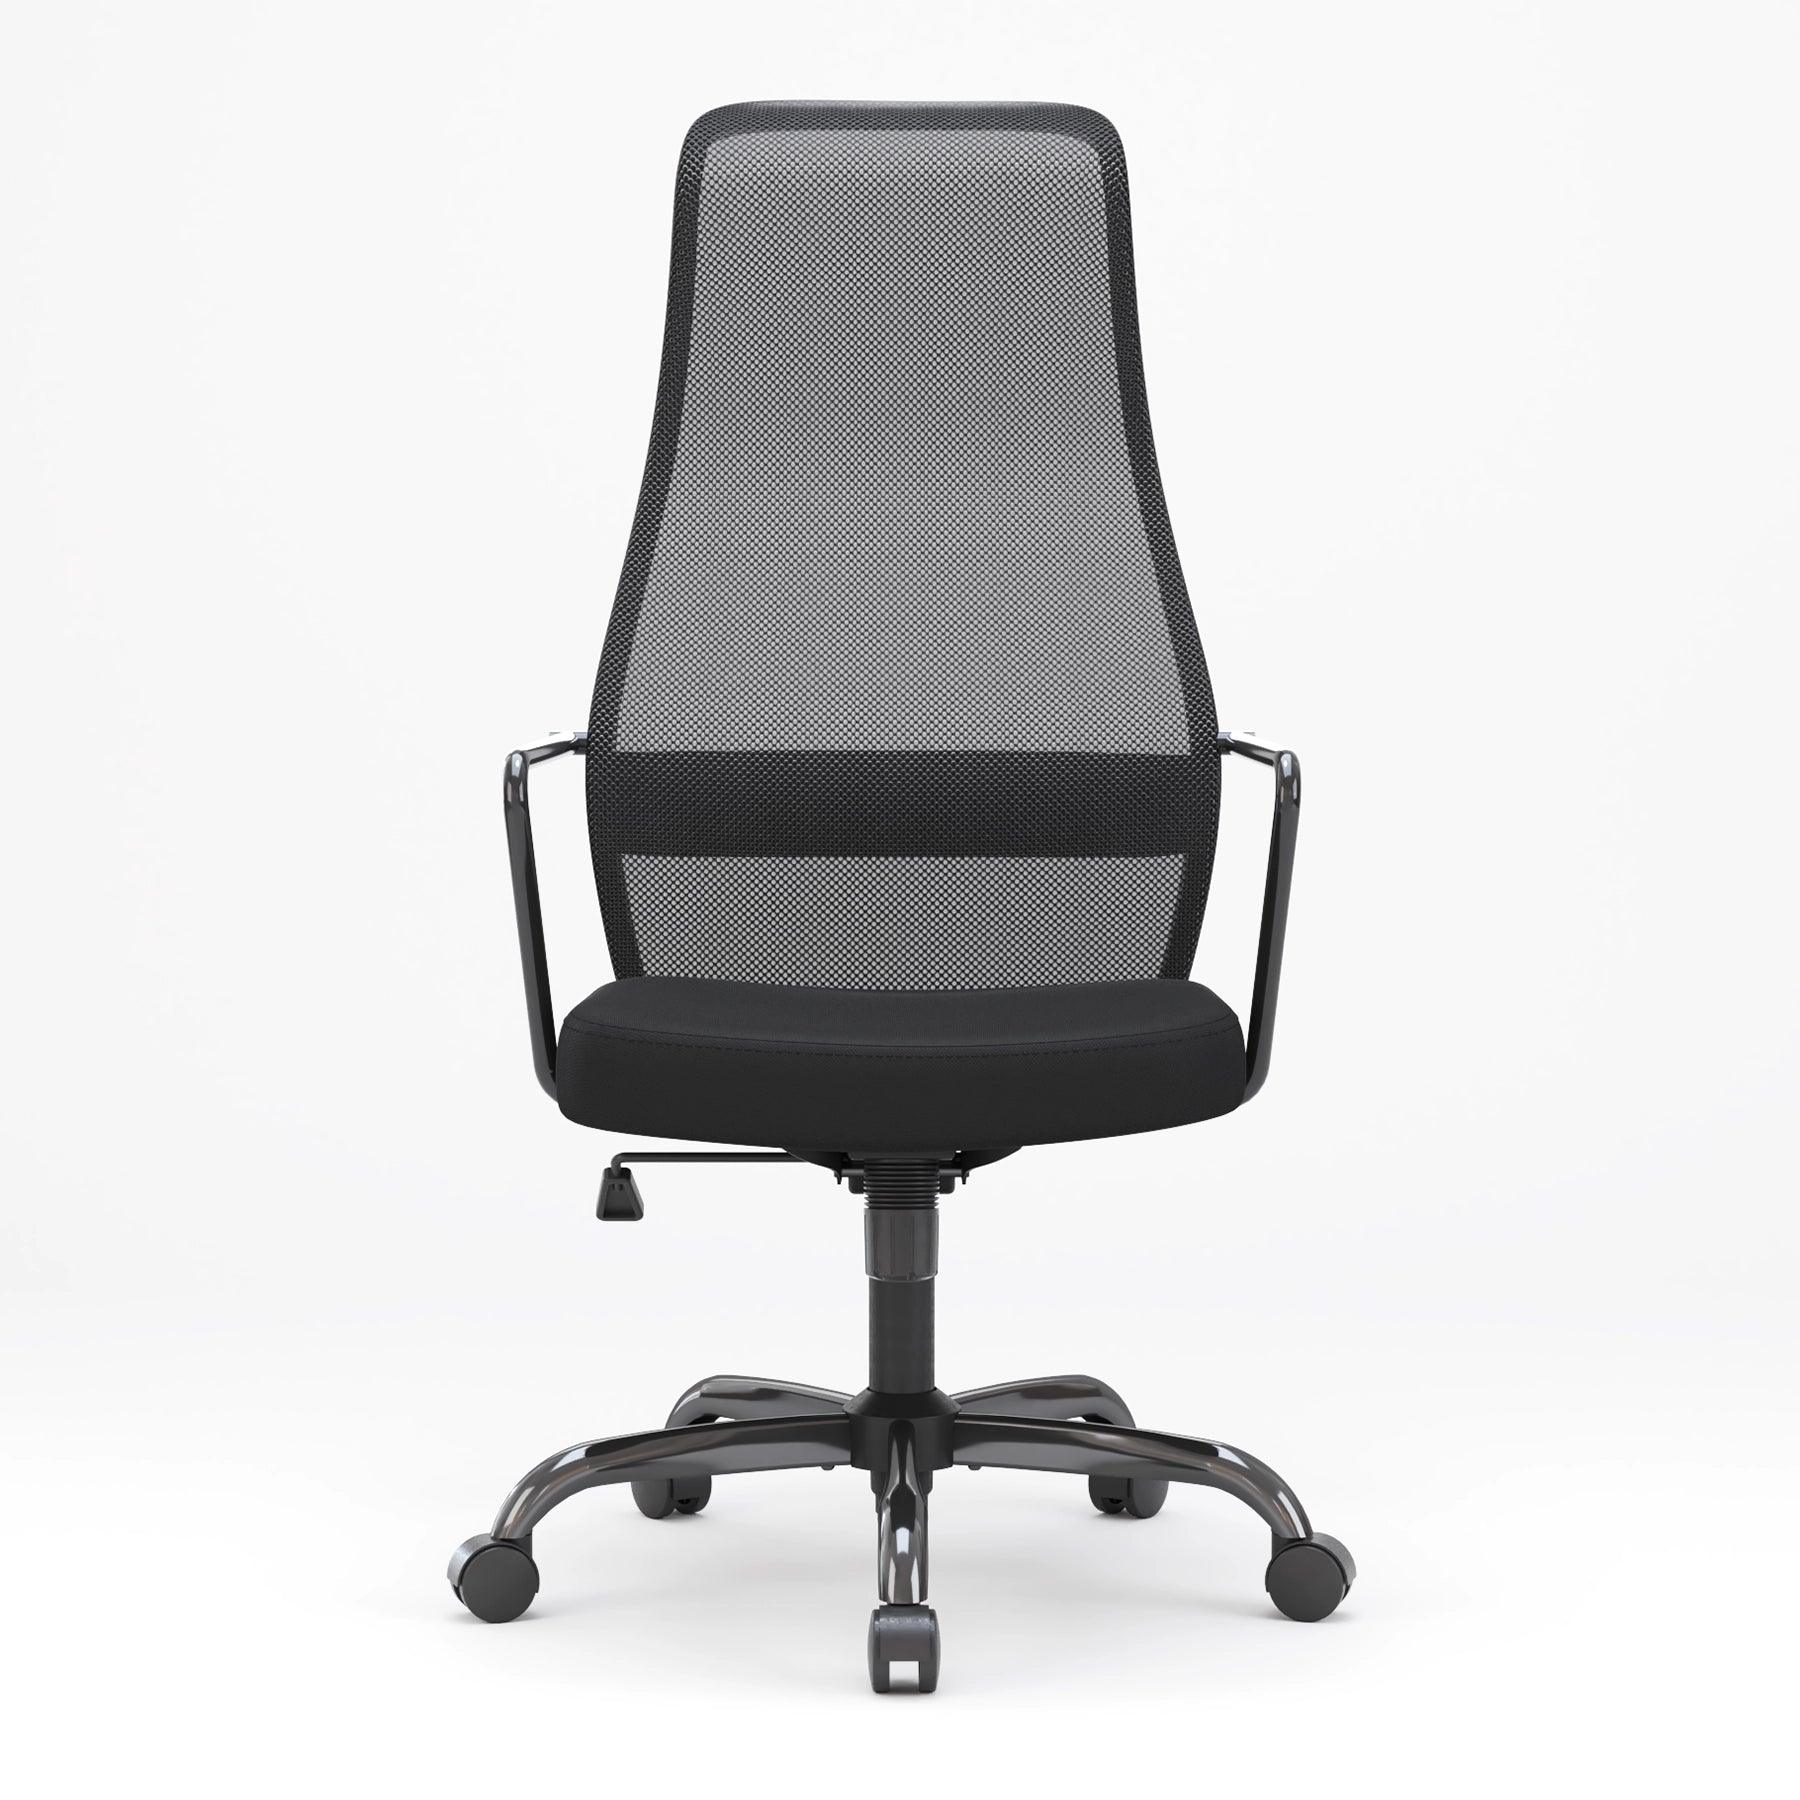 Discover the Best Ergonomic Chair for Back Pain Relief – SIHOO